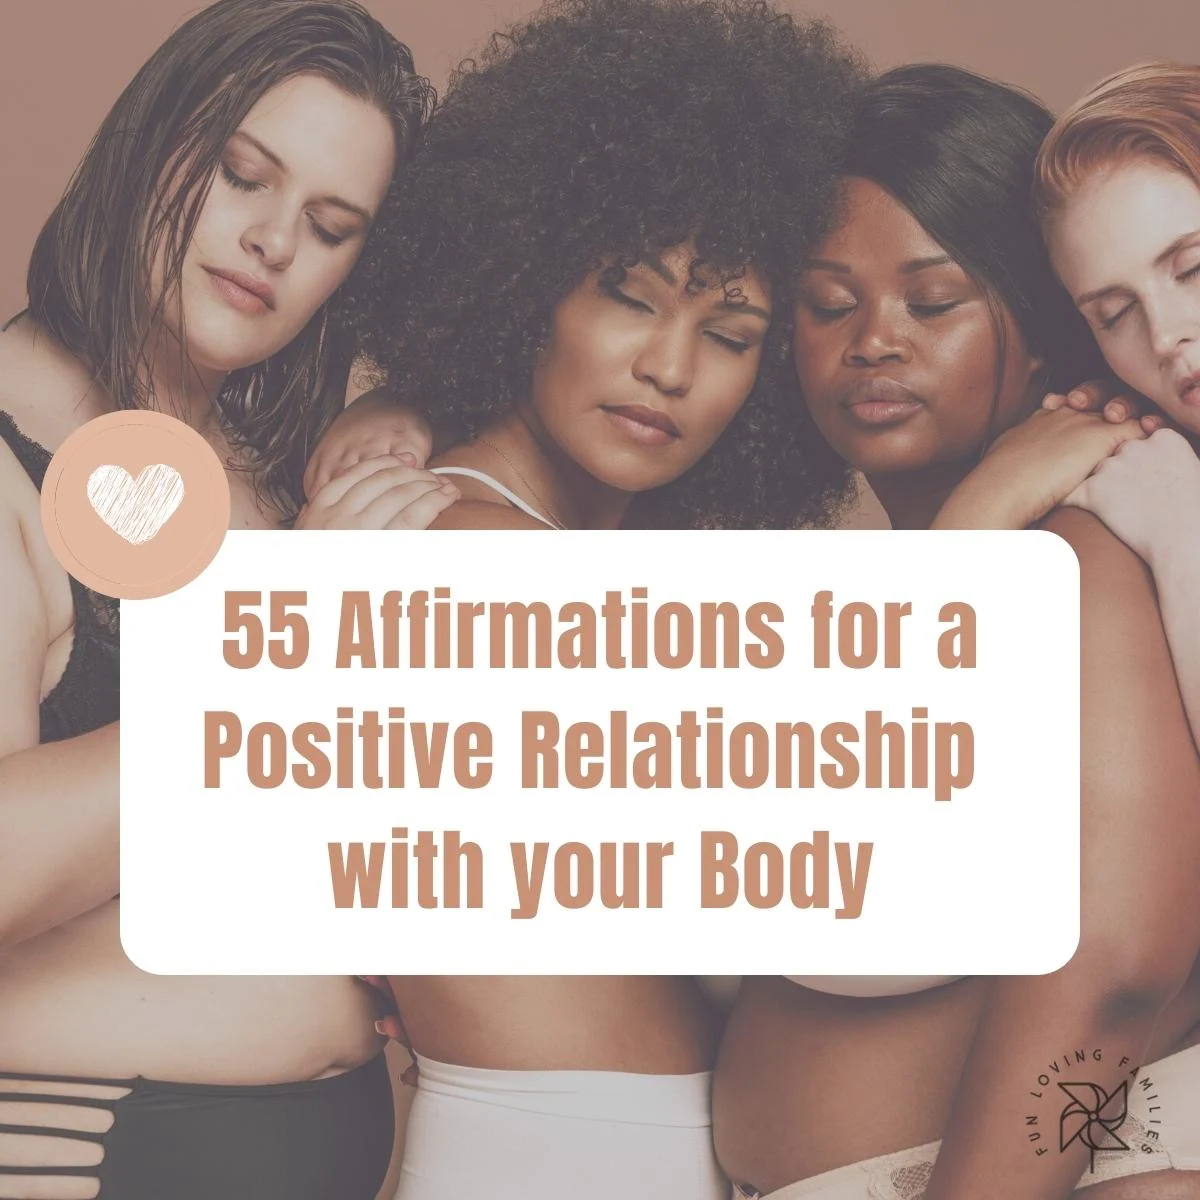 55 Affirmations for a Positive Relationship with your Body